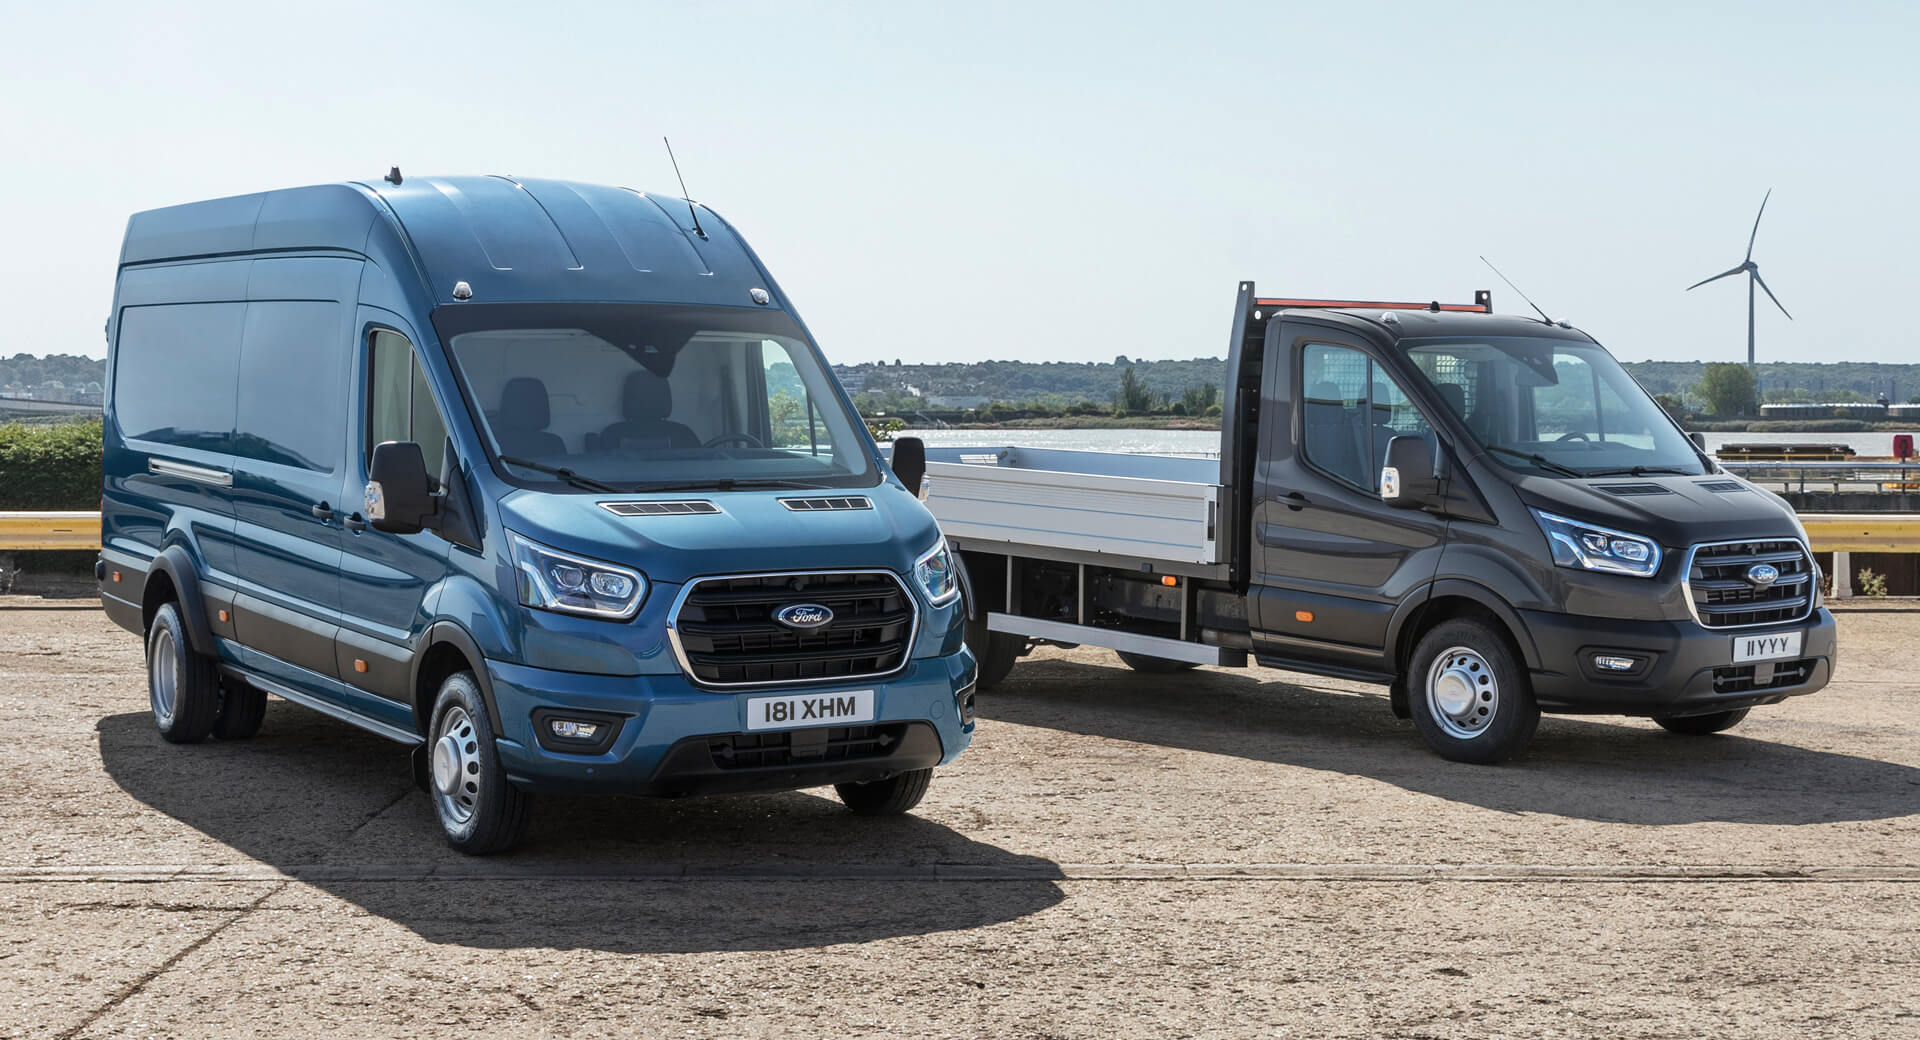 2021 Transit 5-Ton Is Ford's Strongest 